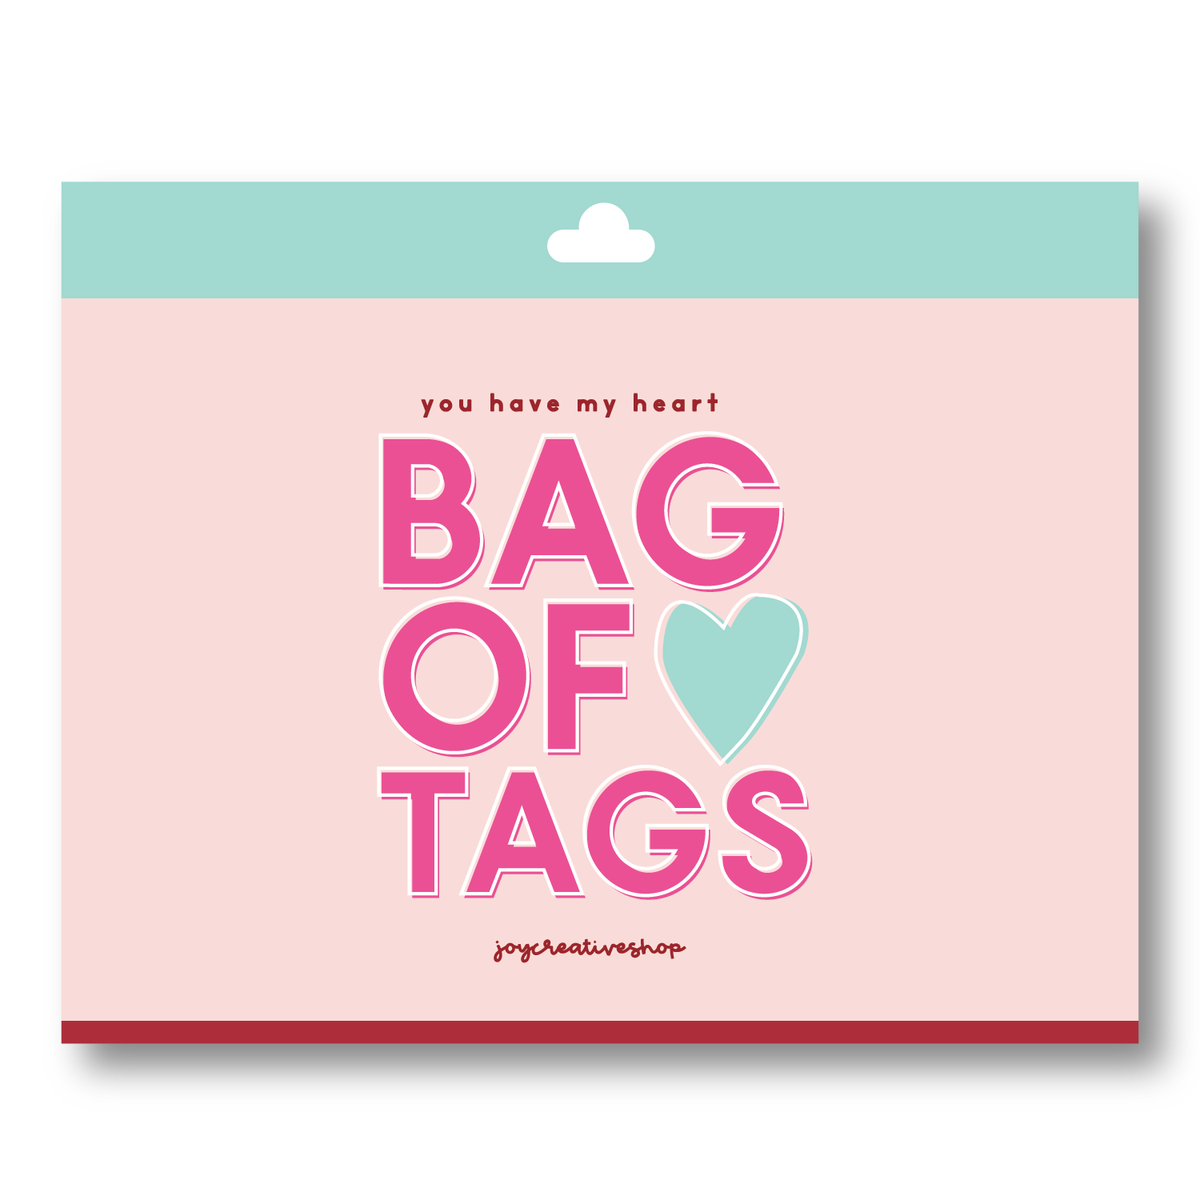 Love Bag of Tags